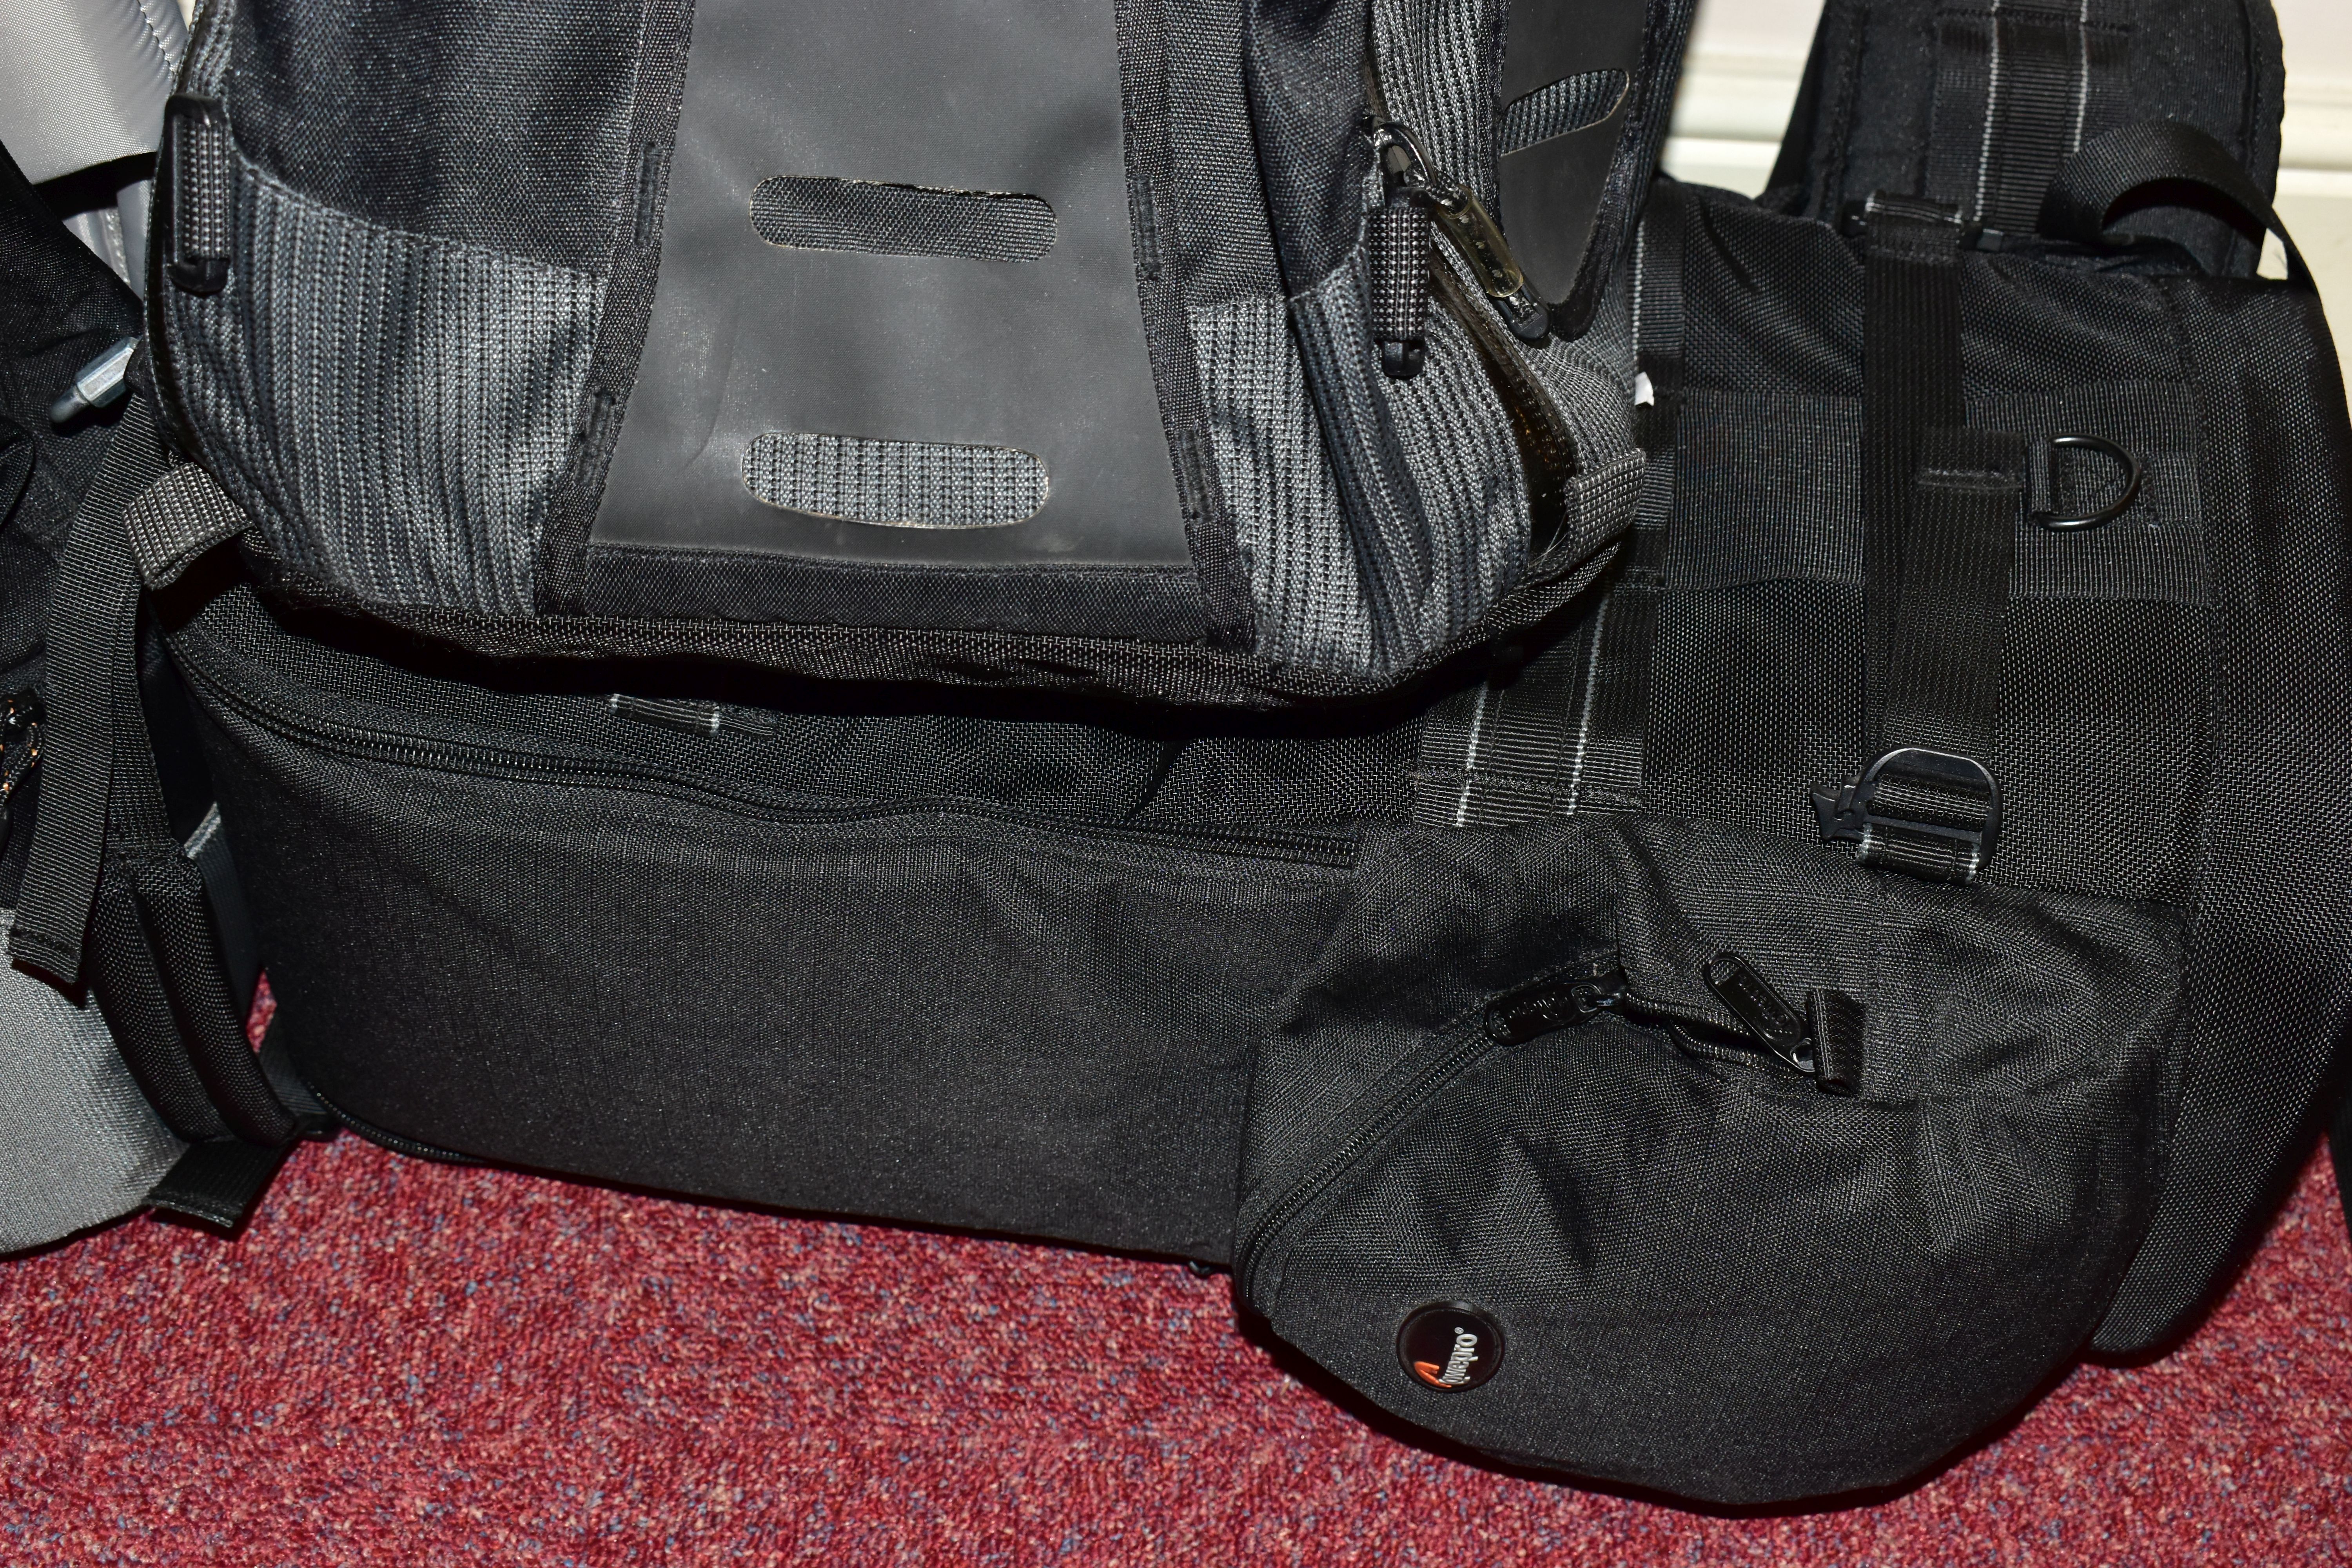 FOUR CAMERA RUCKSACK including three by Lowepro and one by s.inpaid - Image 5 of 5